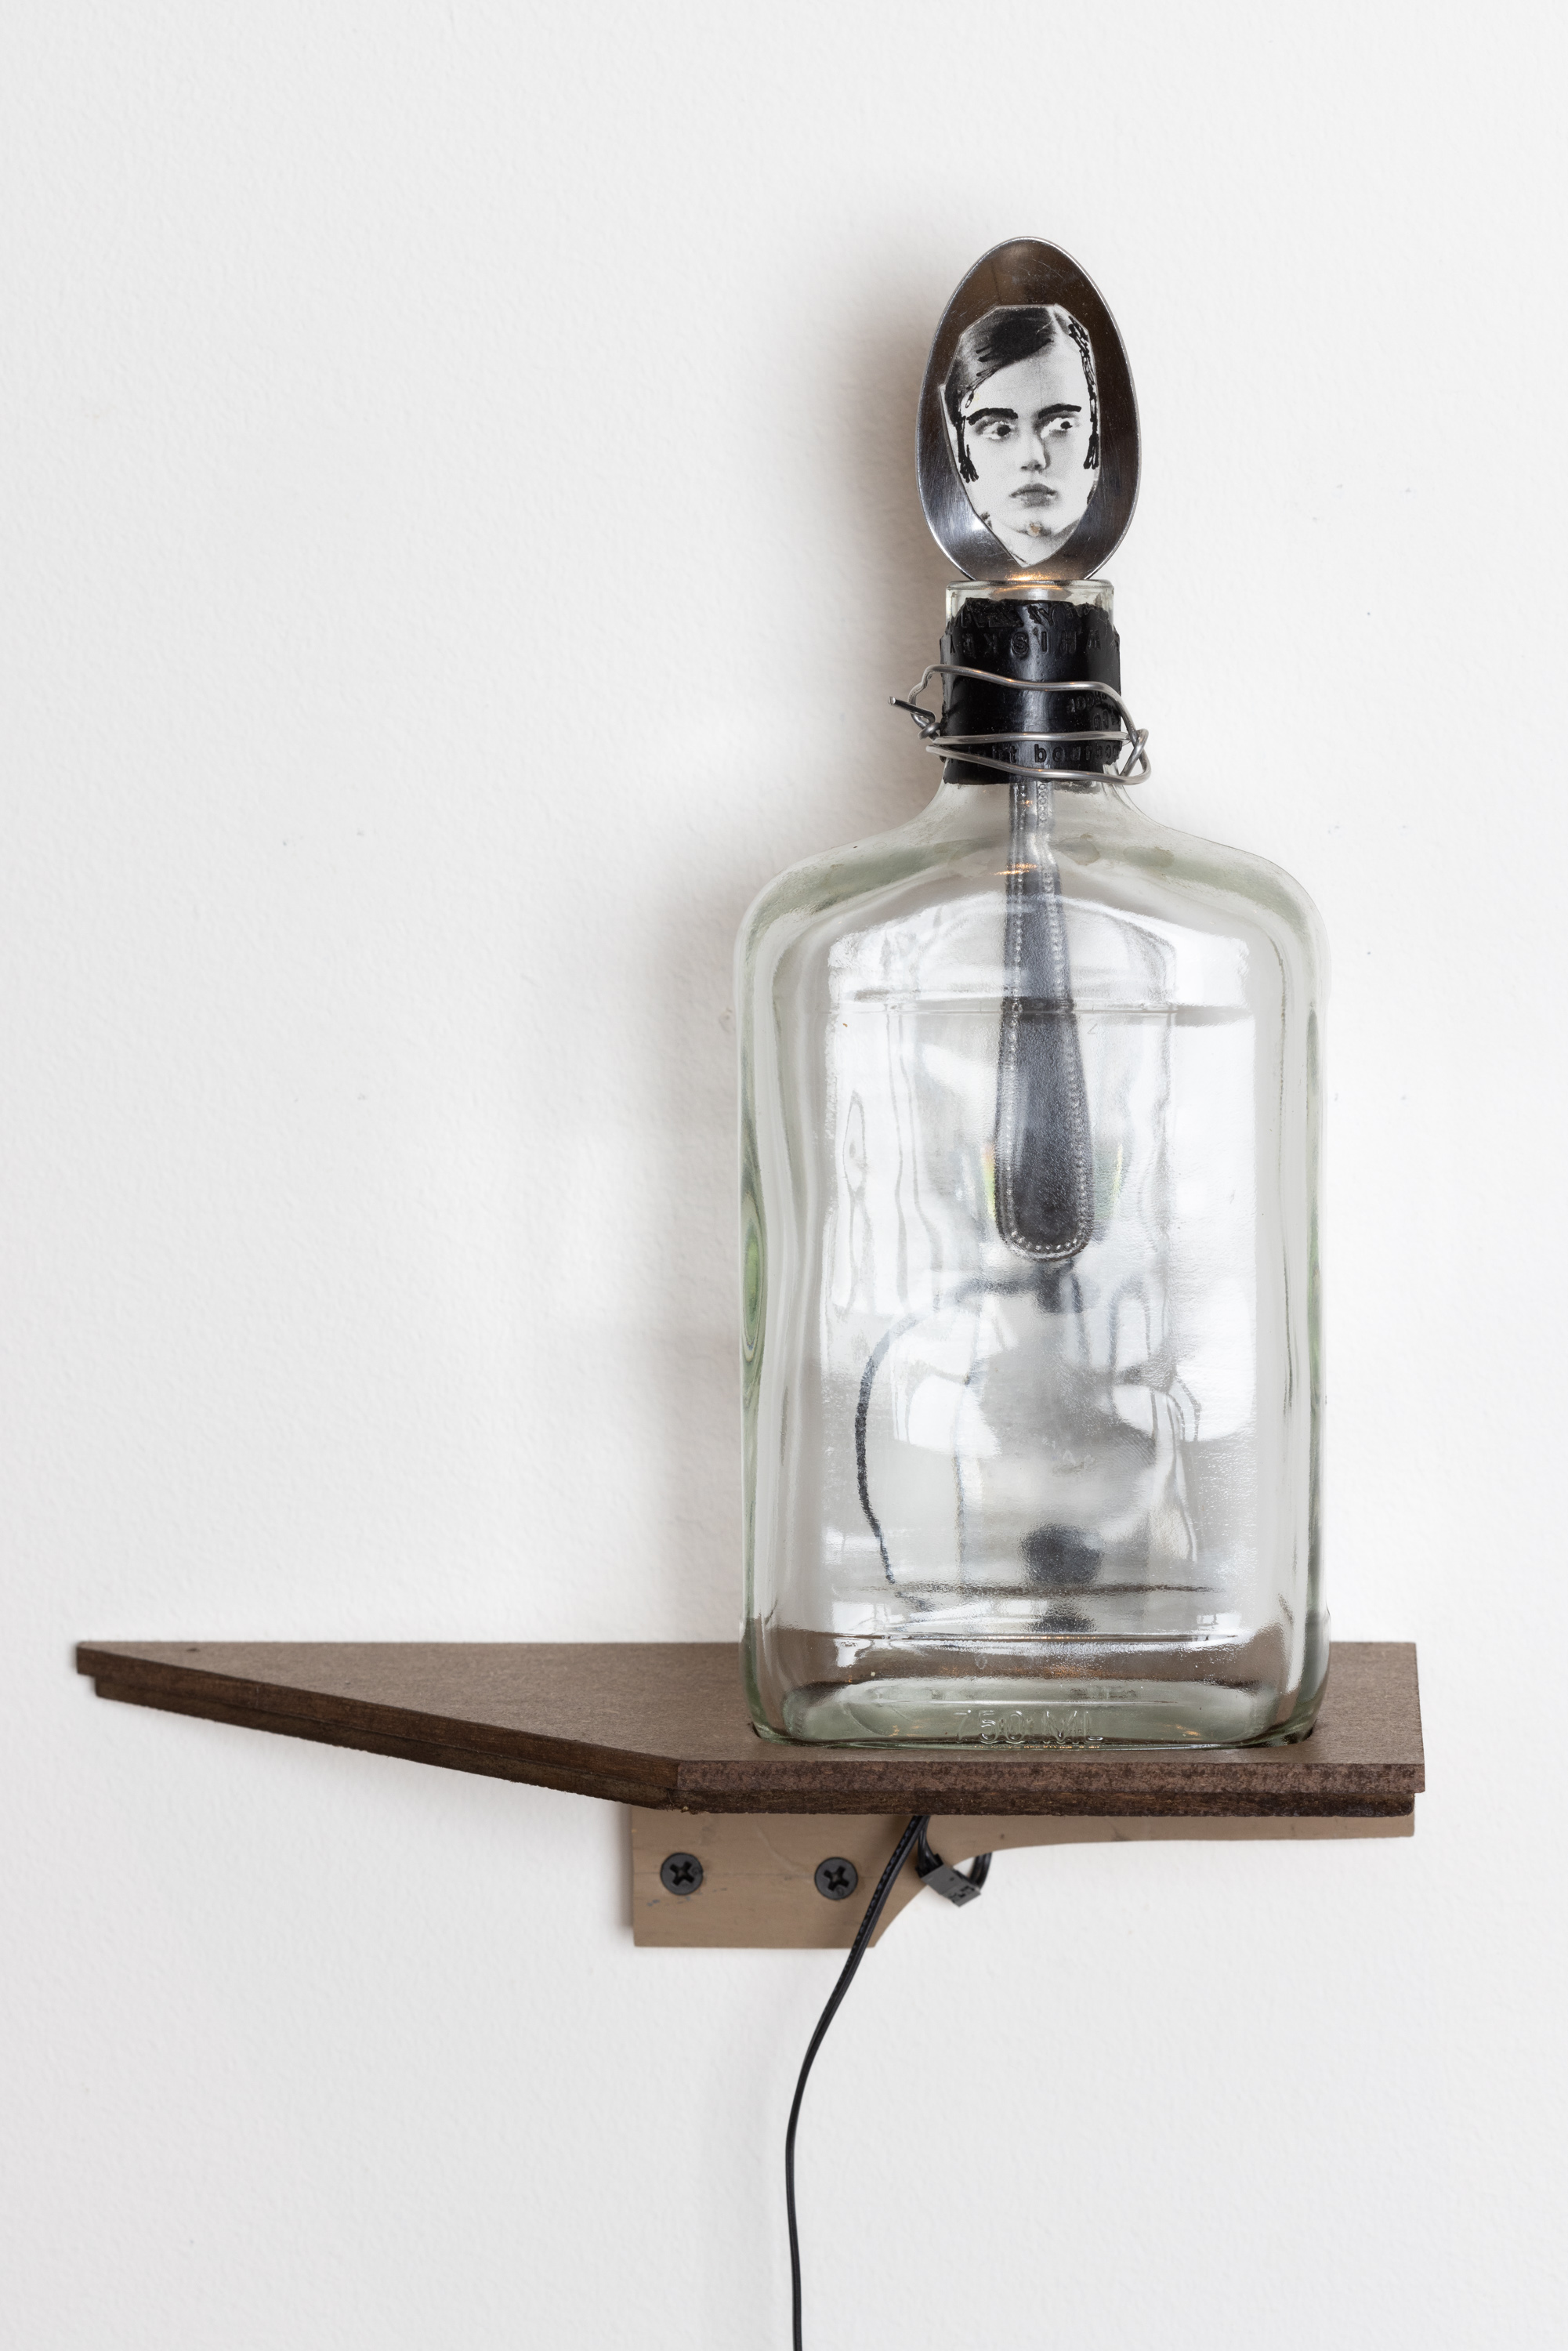 Color image of a mixed media artwork consisting of a glass bottle on a wooden shelf with a silver spoon inserted in the bottle